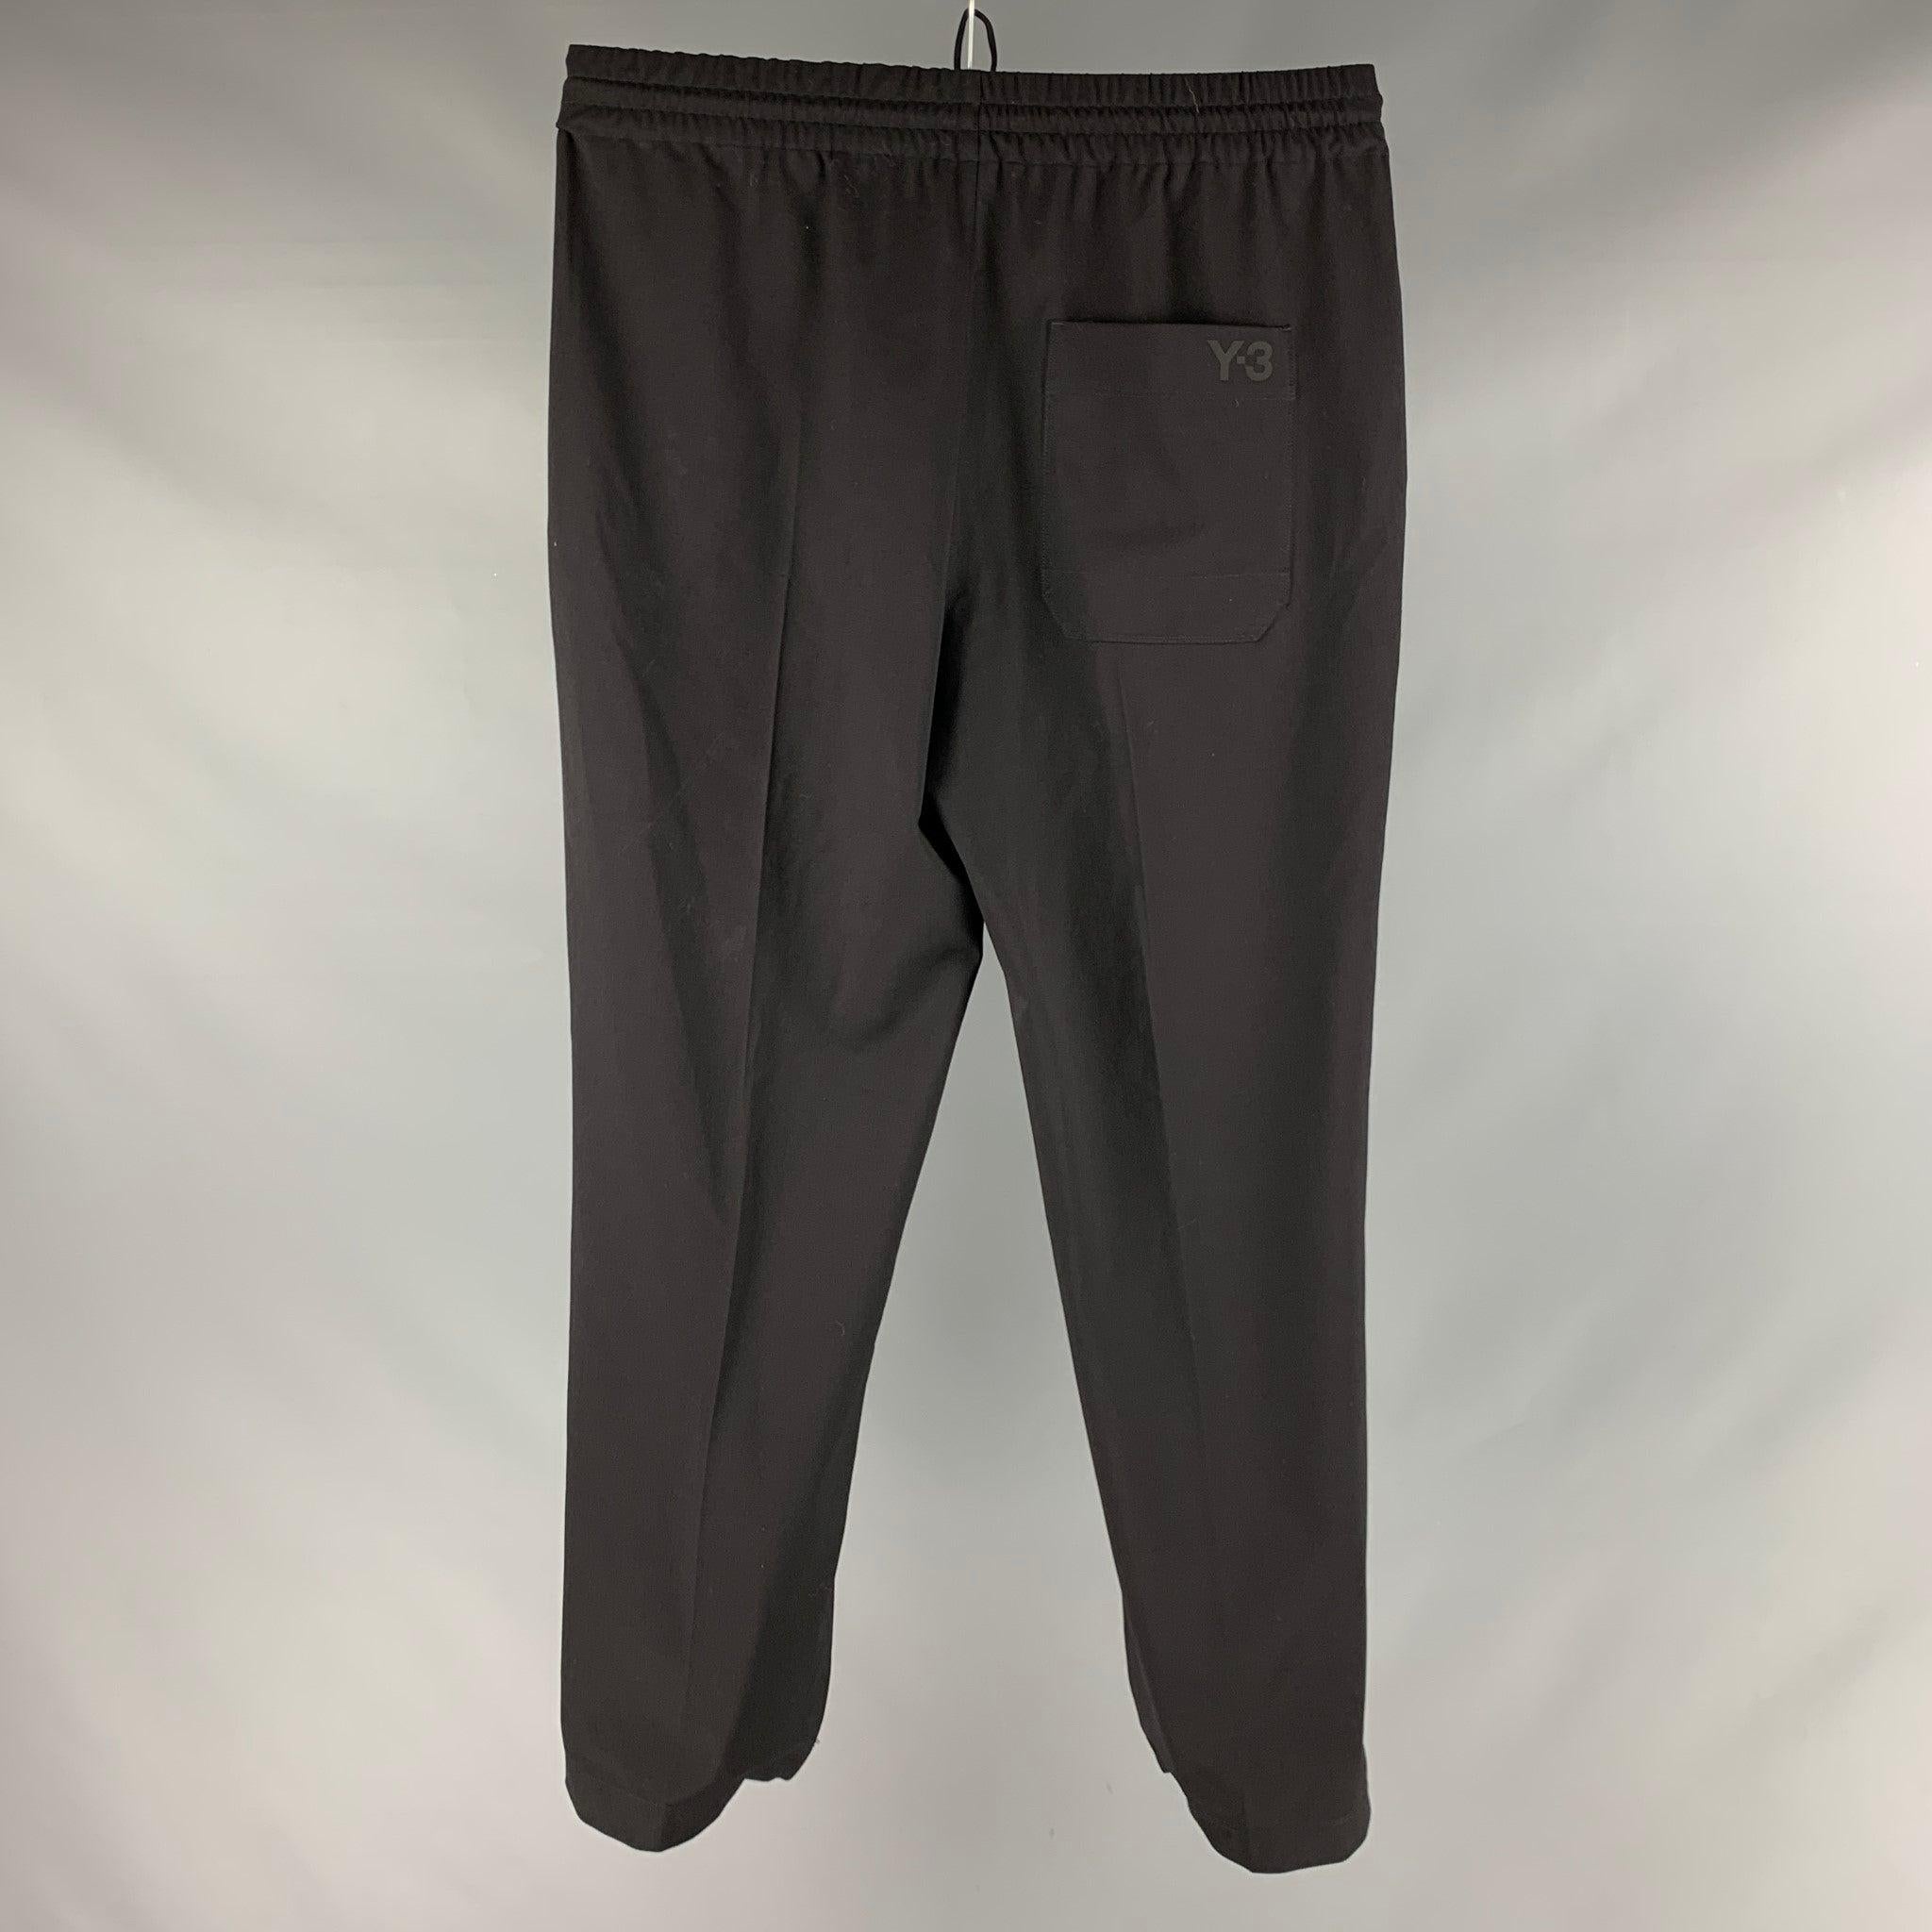 Y-3 by YOHJI YAMAMOTO casual pants comes in a black polyester twill
 featuring a
 logo detail, elastic waistband, drawstring detail, and a zip fly closure.Excellent Pre-Owned Condition. 

Marked:   L 

Measurements: 
  Waist: 35 inches Rise: 12.5